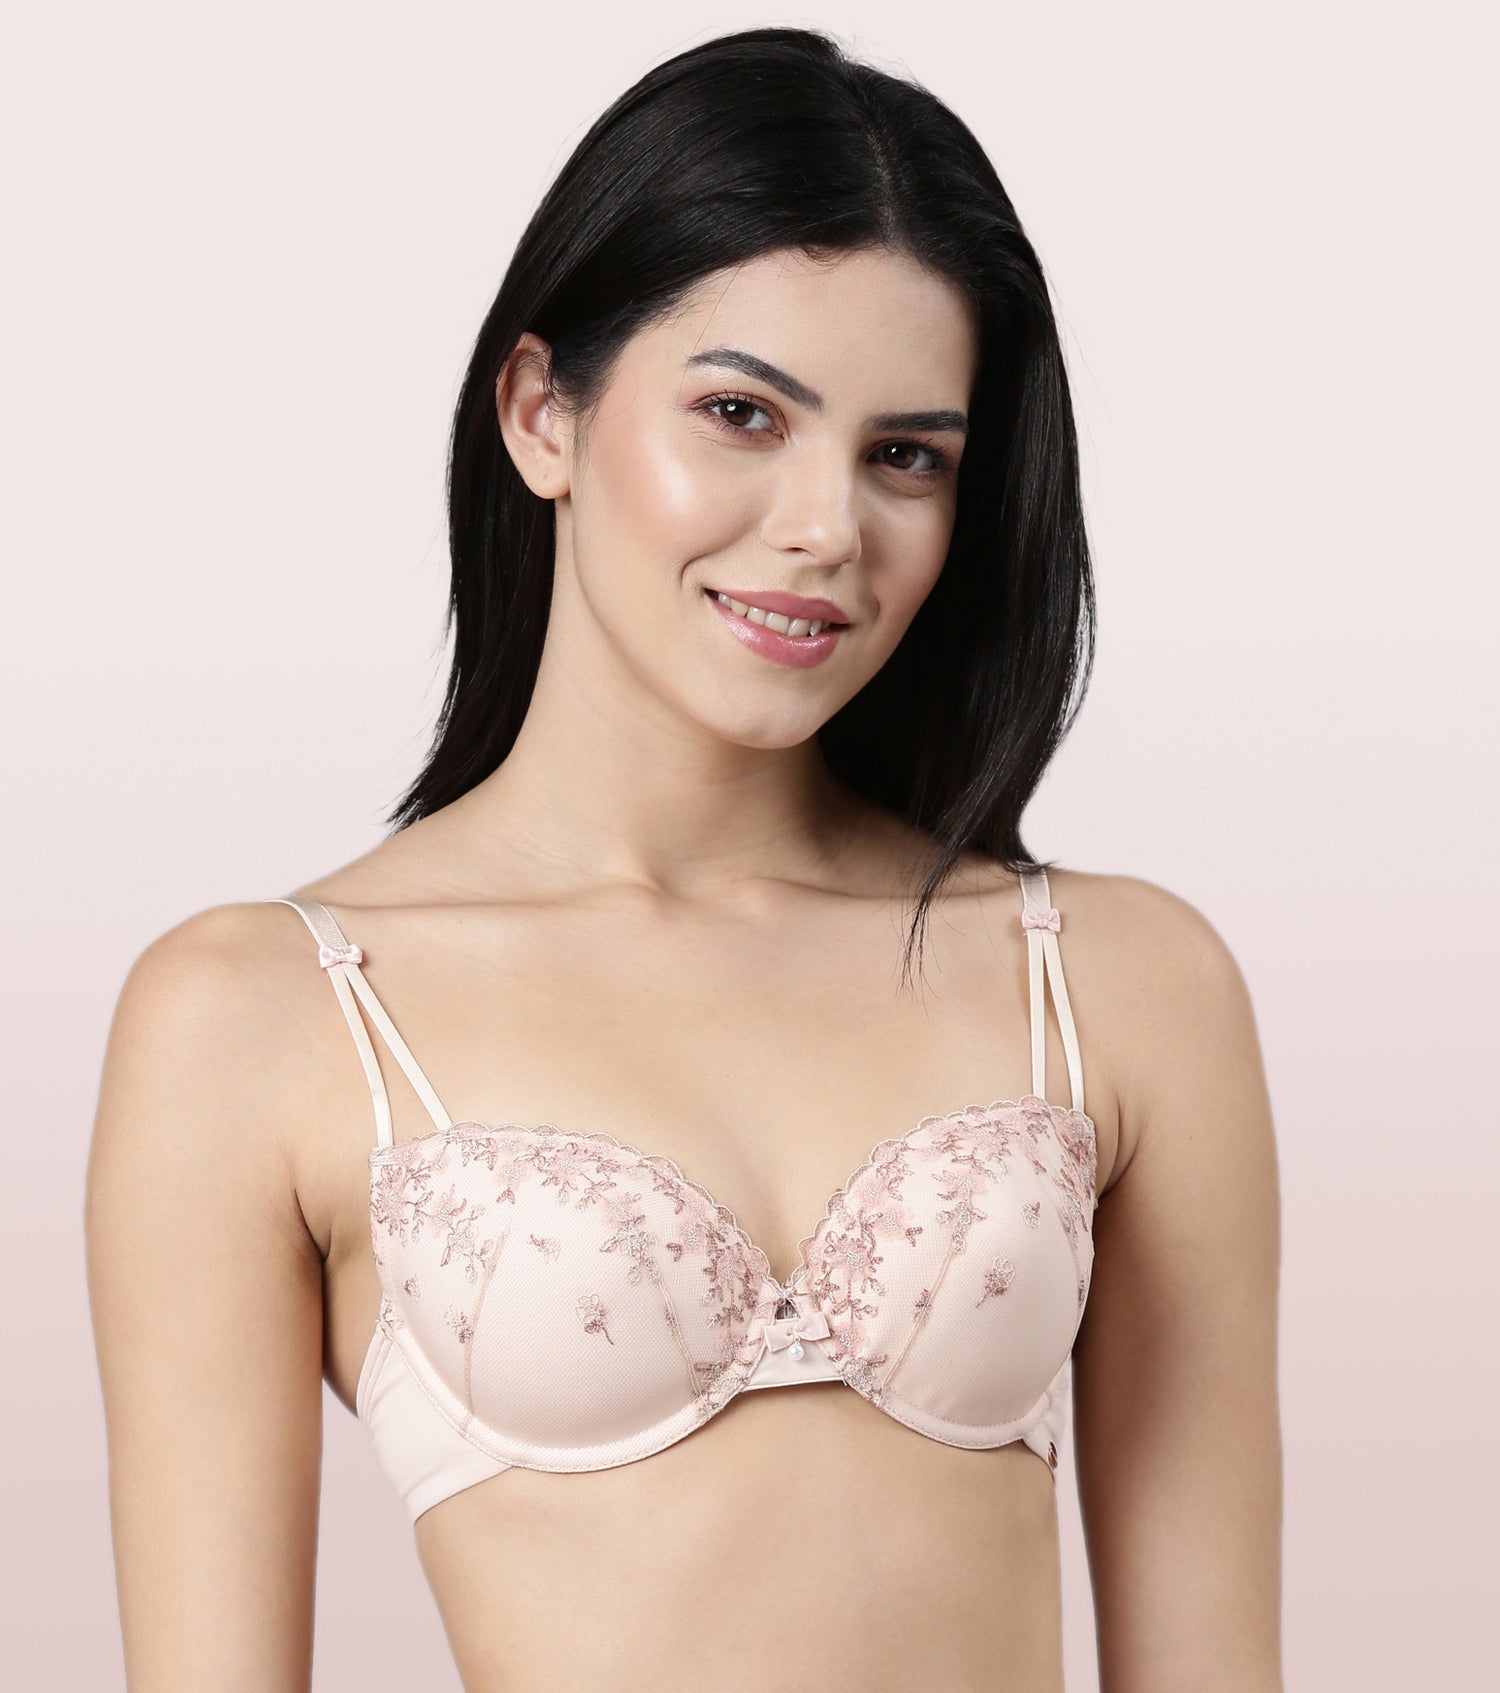 Enamor F127
LUXE LACE BRA
PADDED WIRED MEDIUM COVERAGE